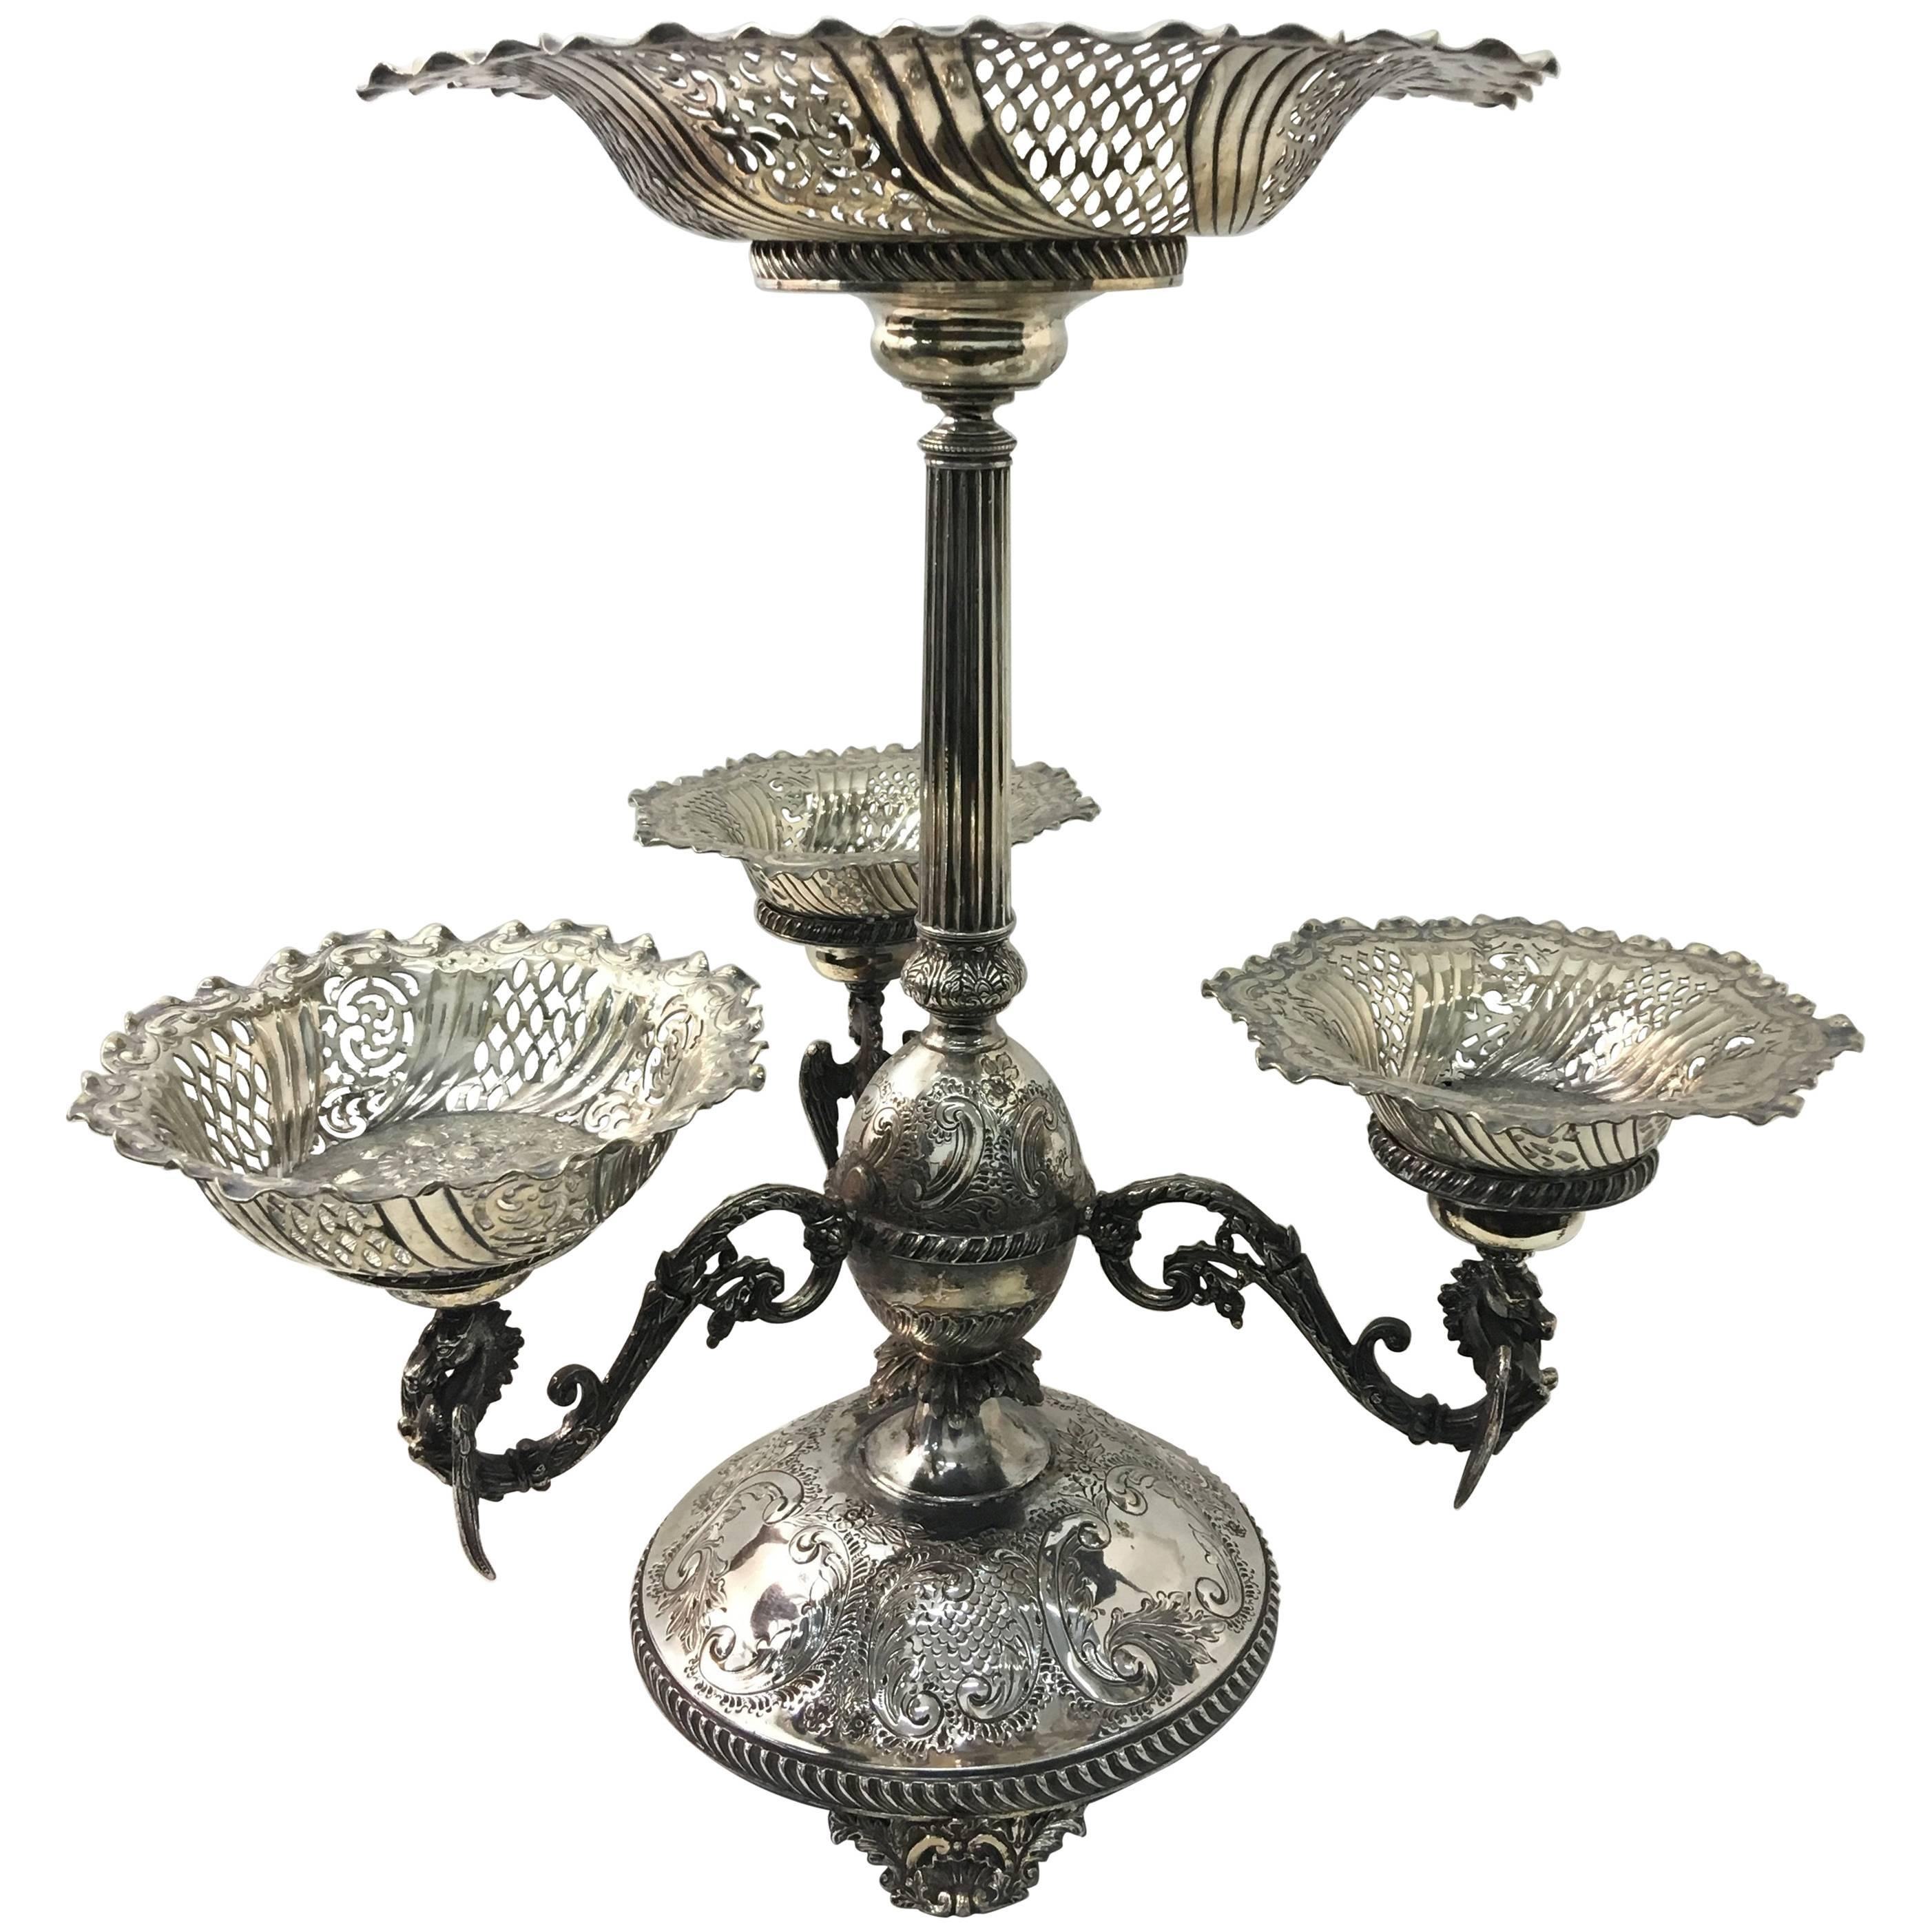 English Victorian Epergne by Mappin & Webb, circa 1870